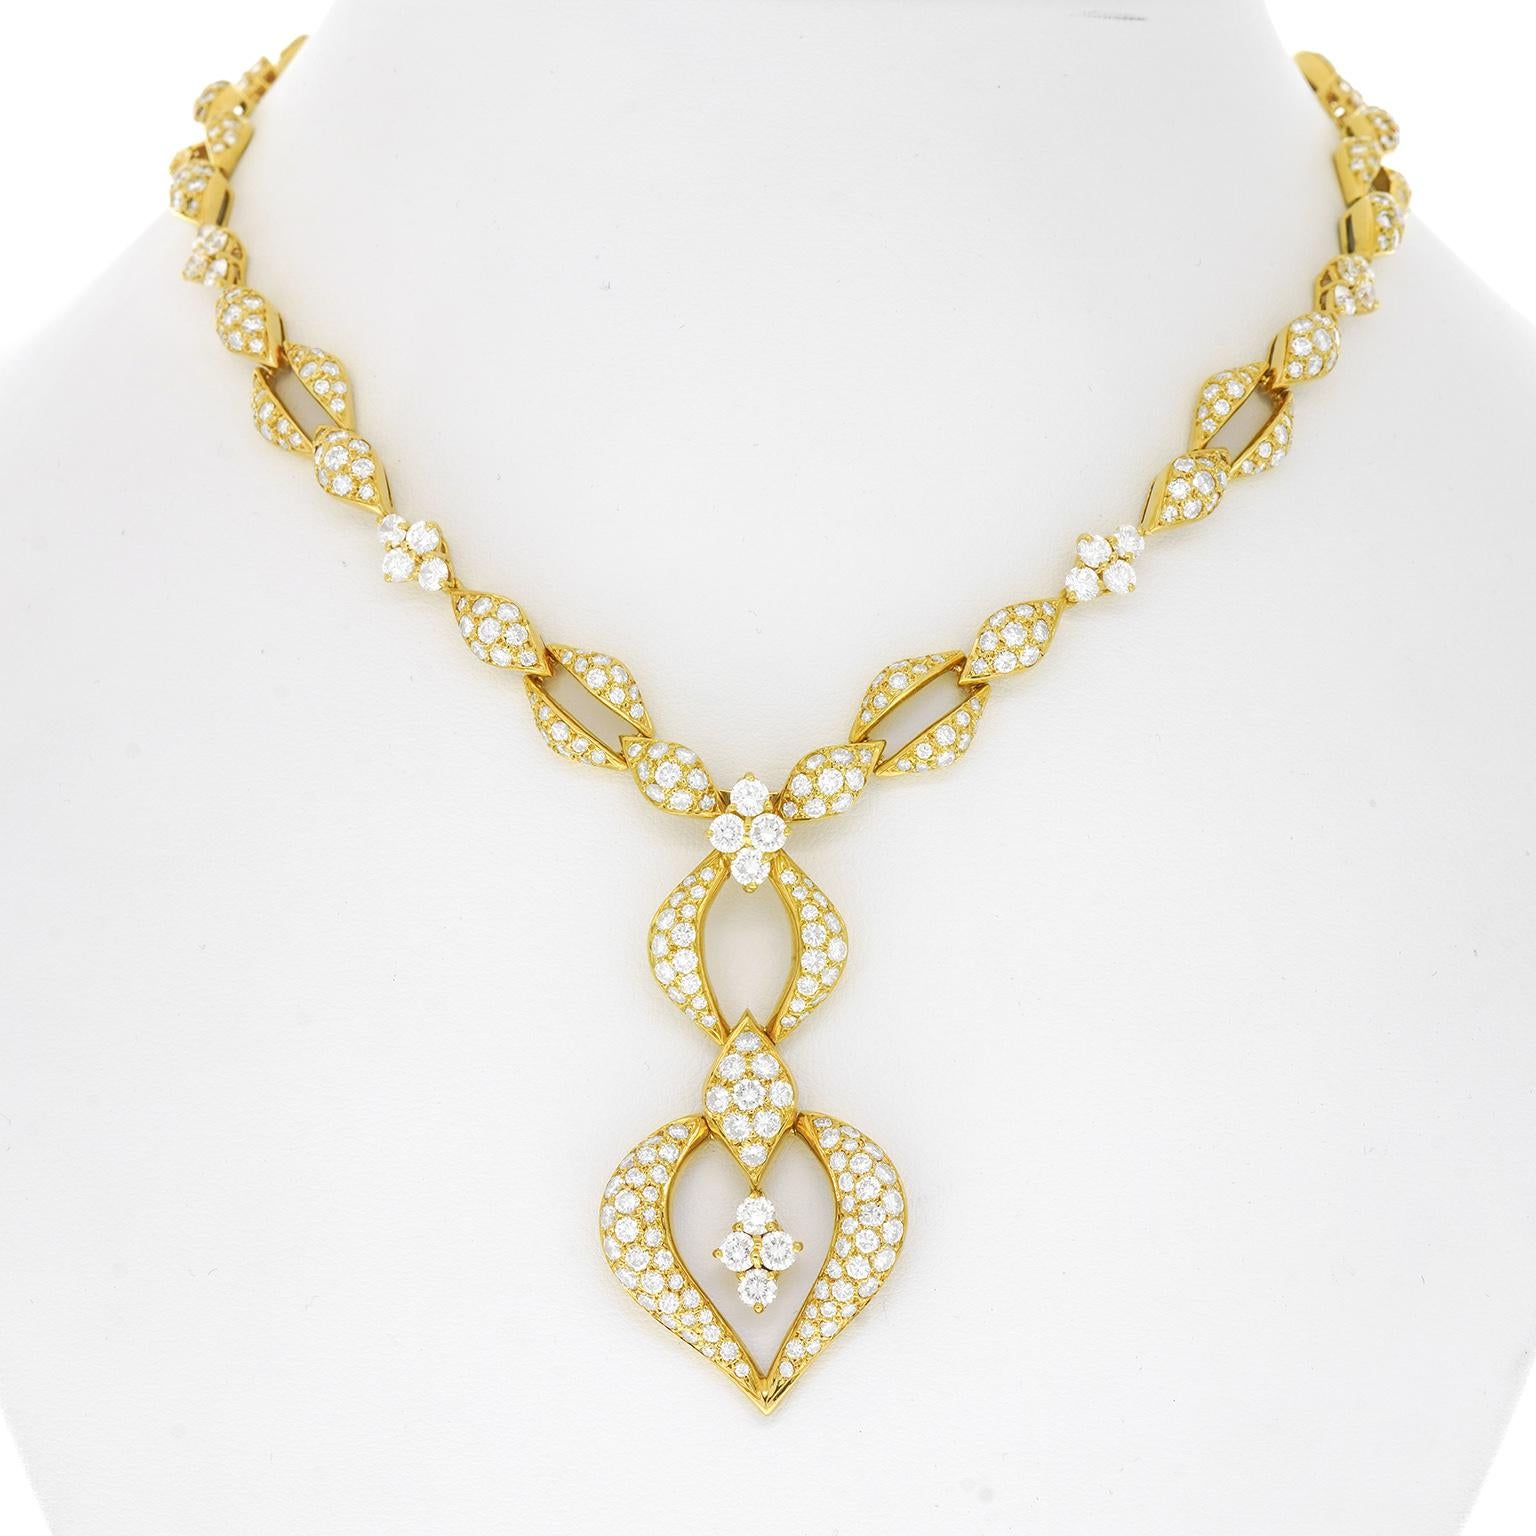 French Sixties Chic Diamond Necklace For Sale 2